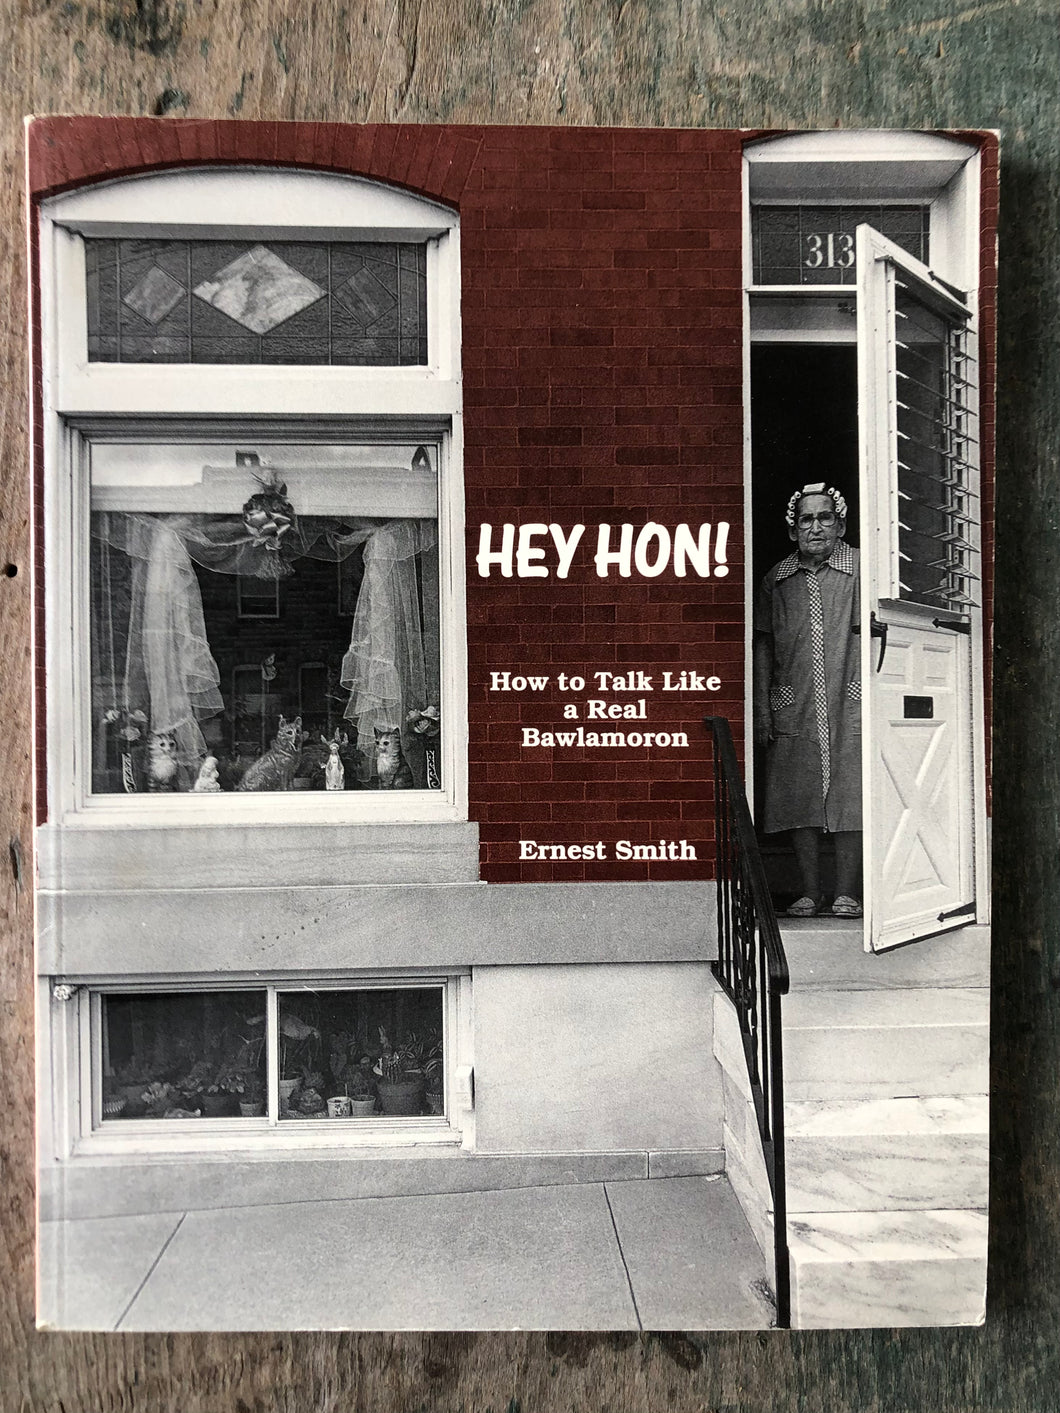 Hey Hon! How to Talk Like a Real Bawlamoron by Ernest Smith